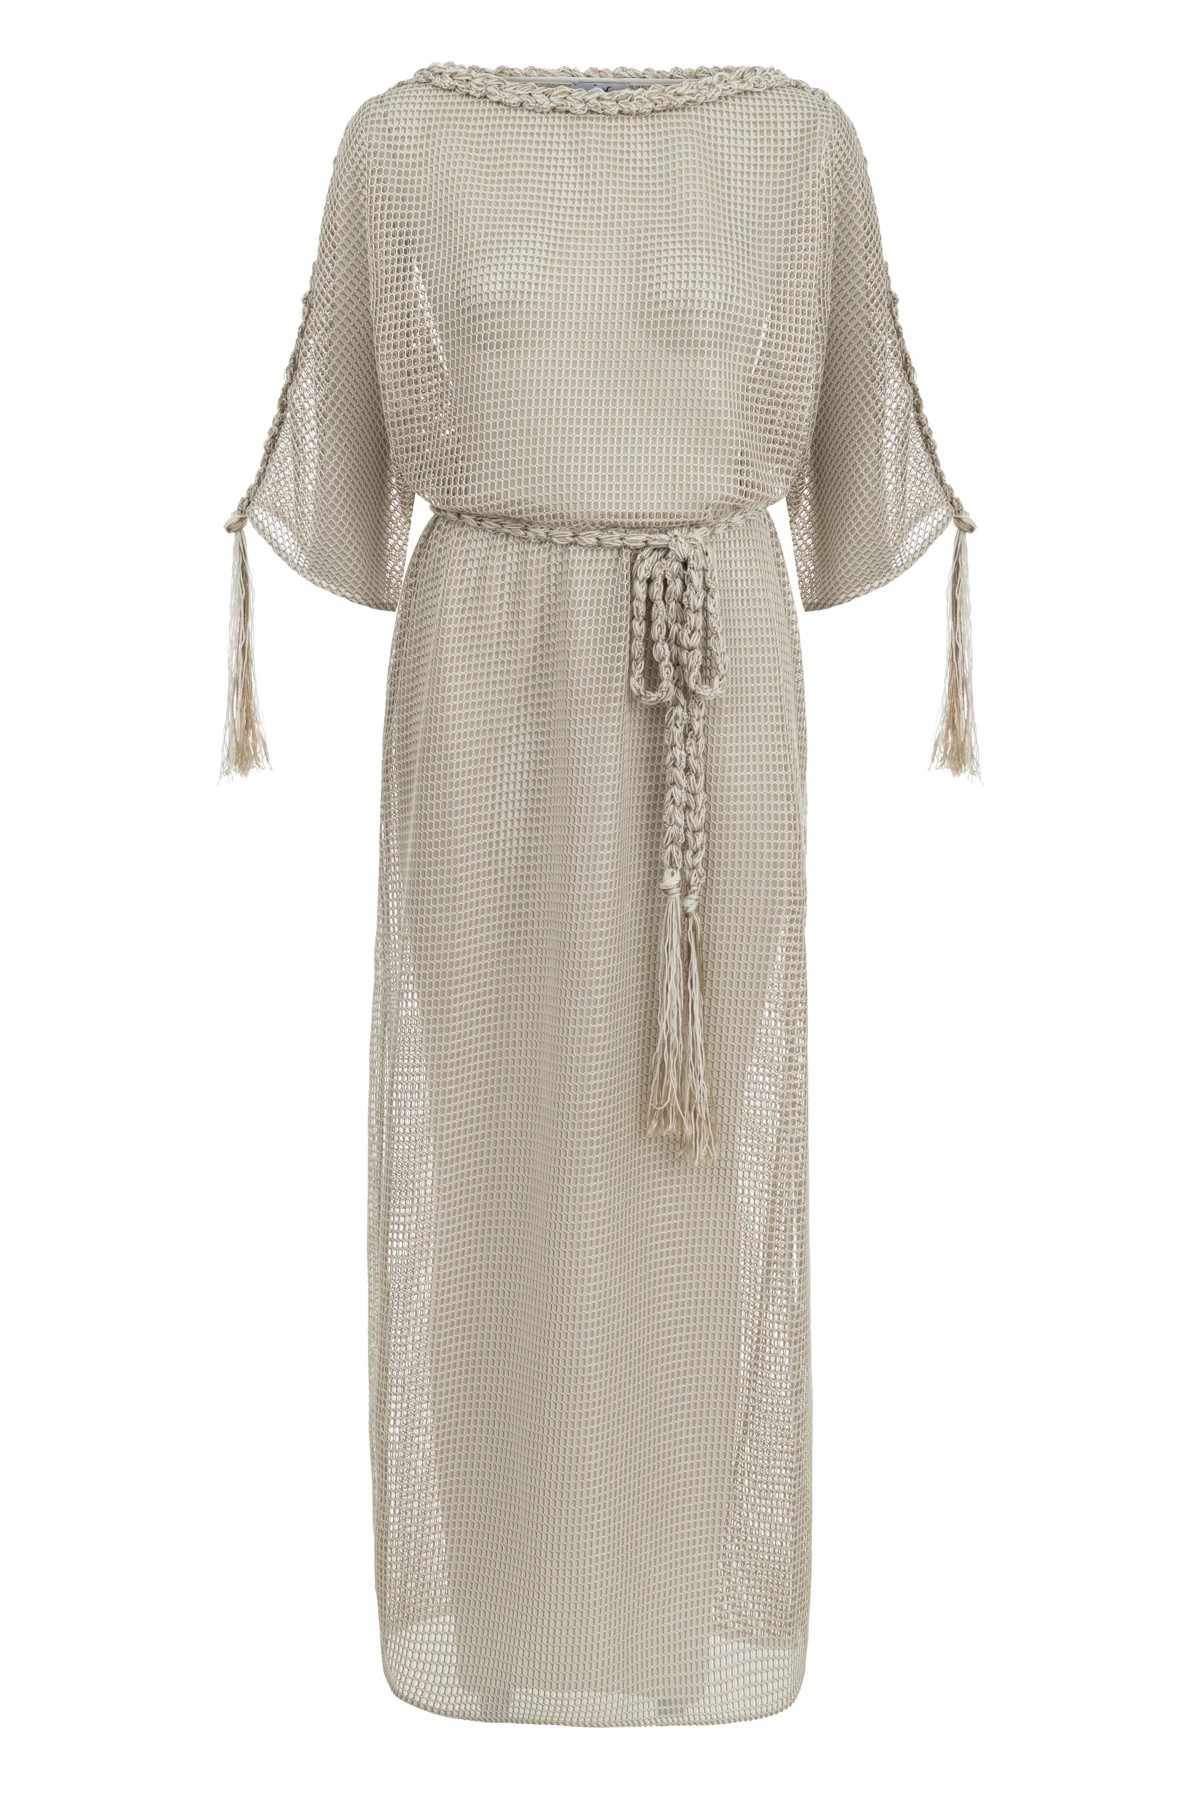 STONE Belted Maxi Dress image number 3